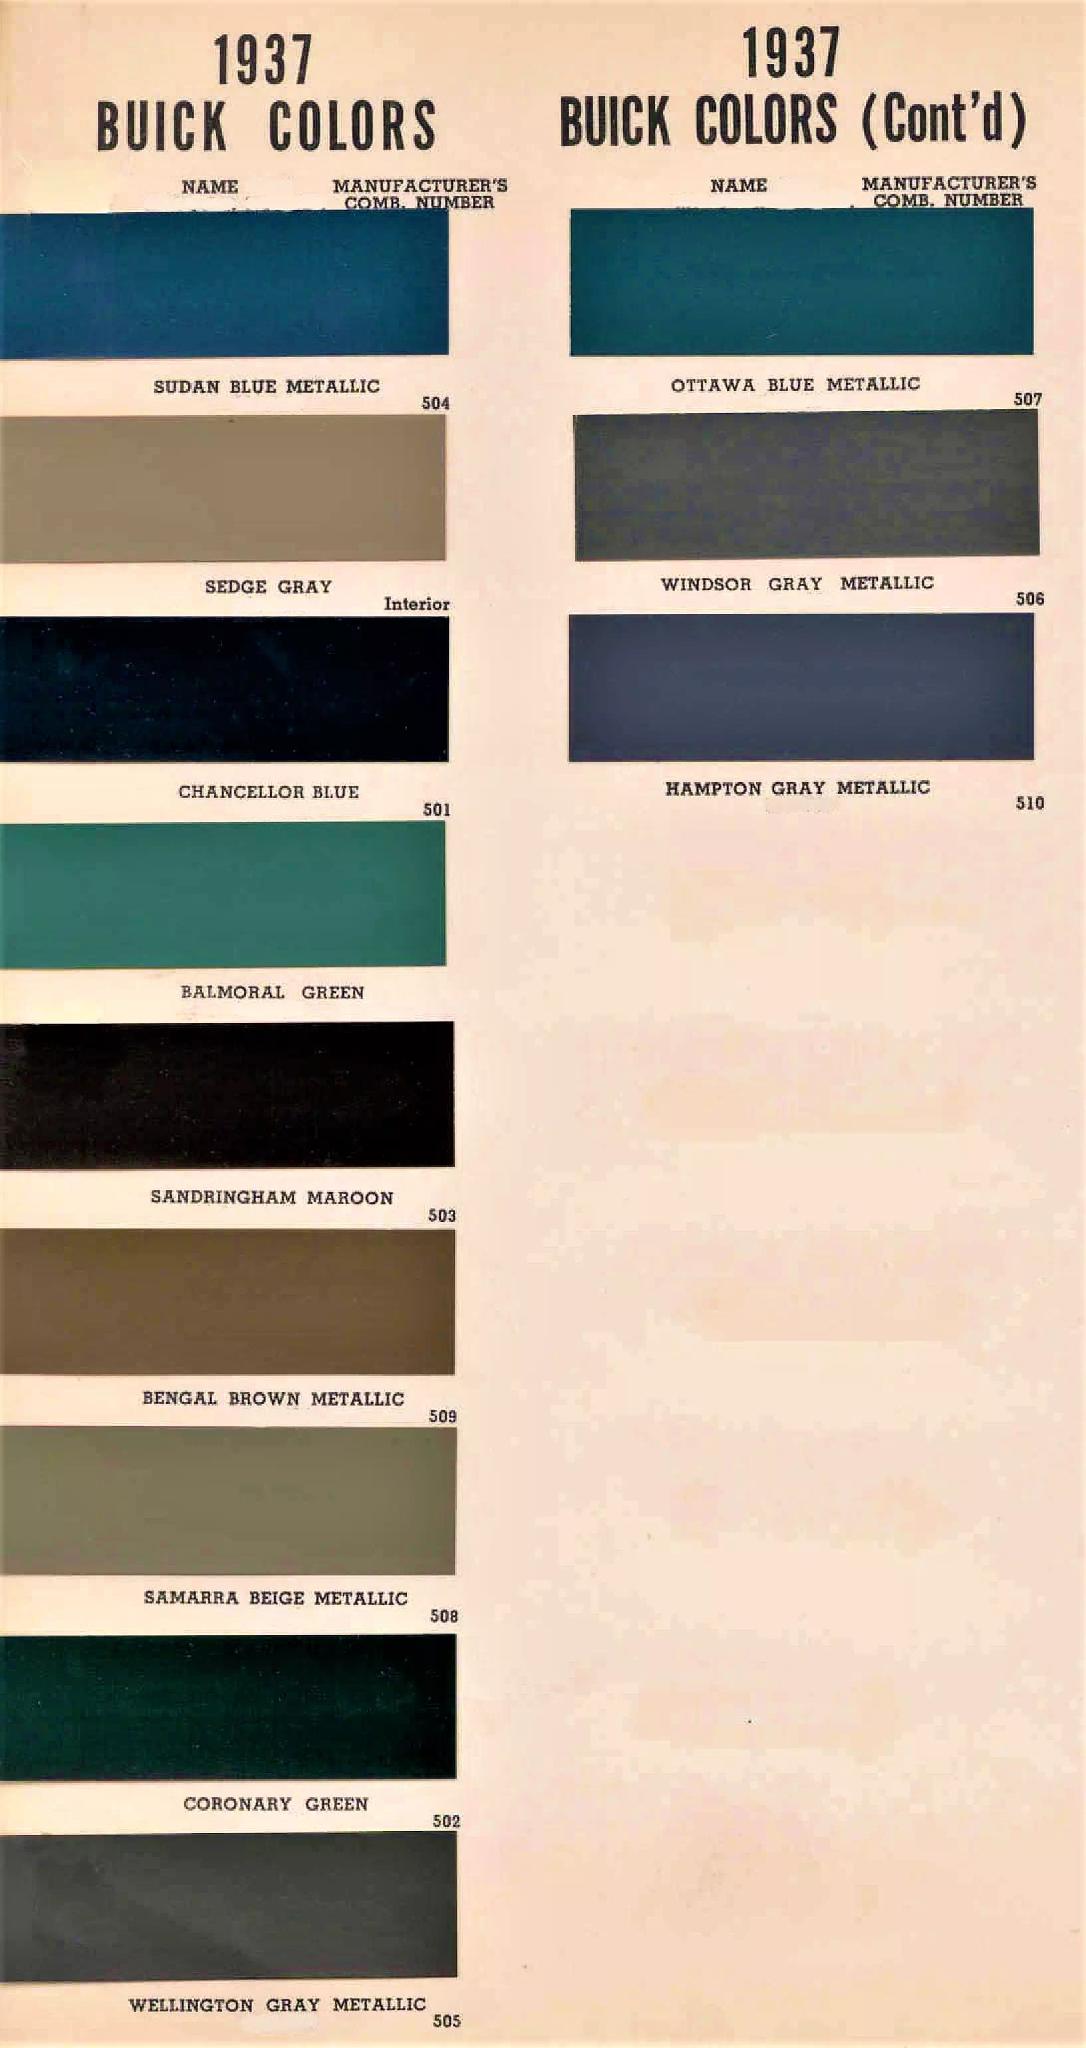 Colors and the codes used for them on the 1937 Buick Vehicles.